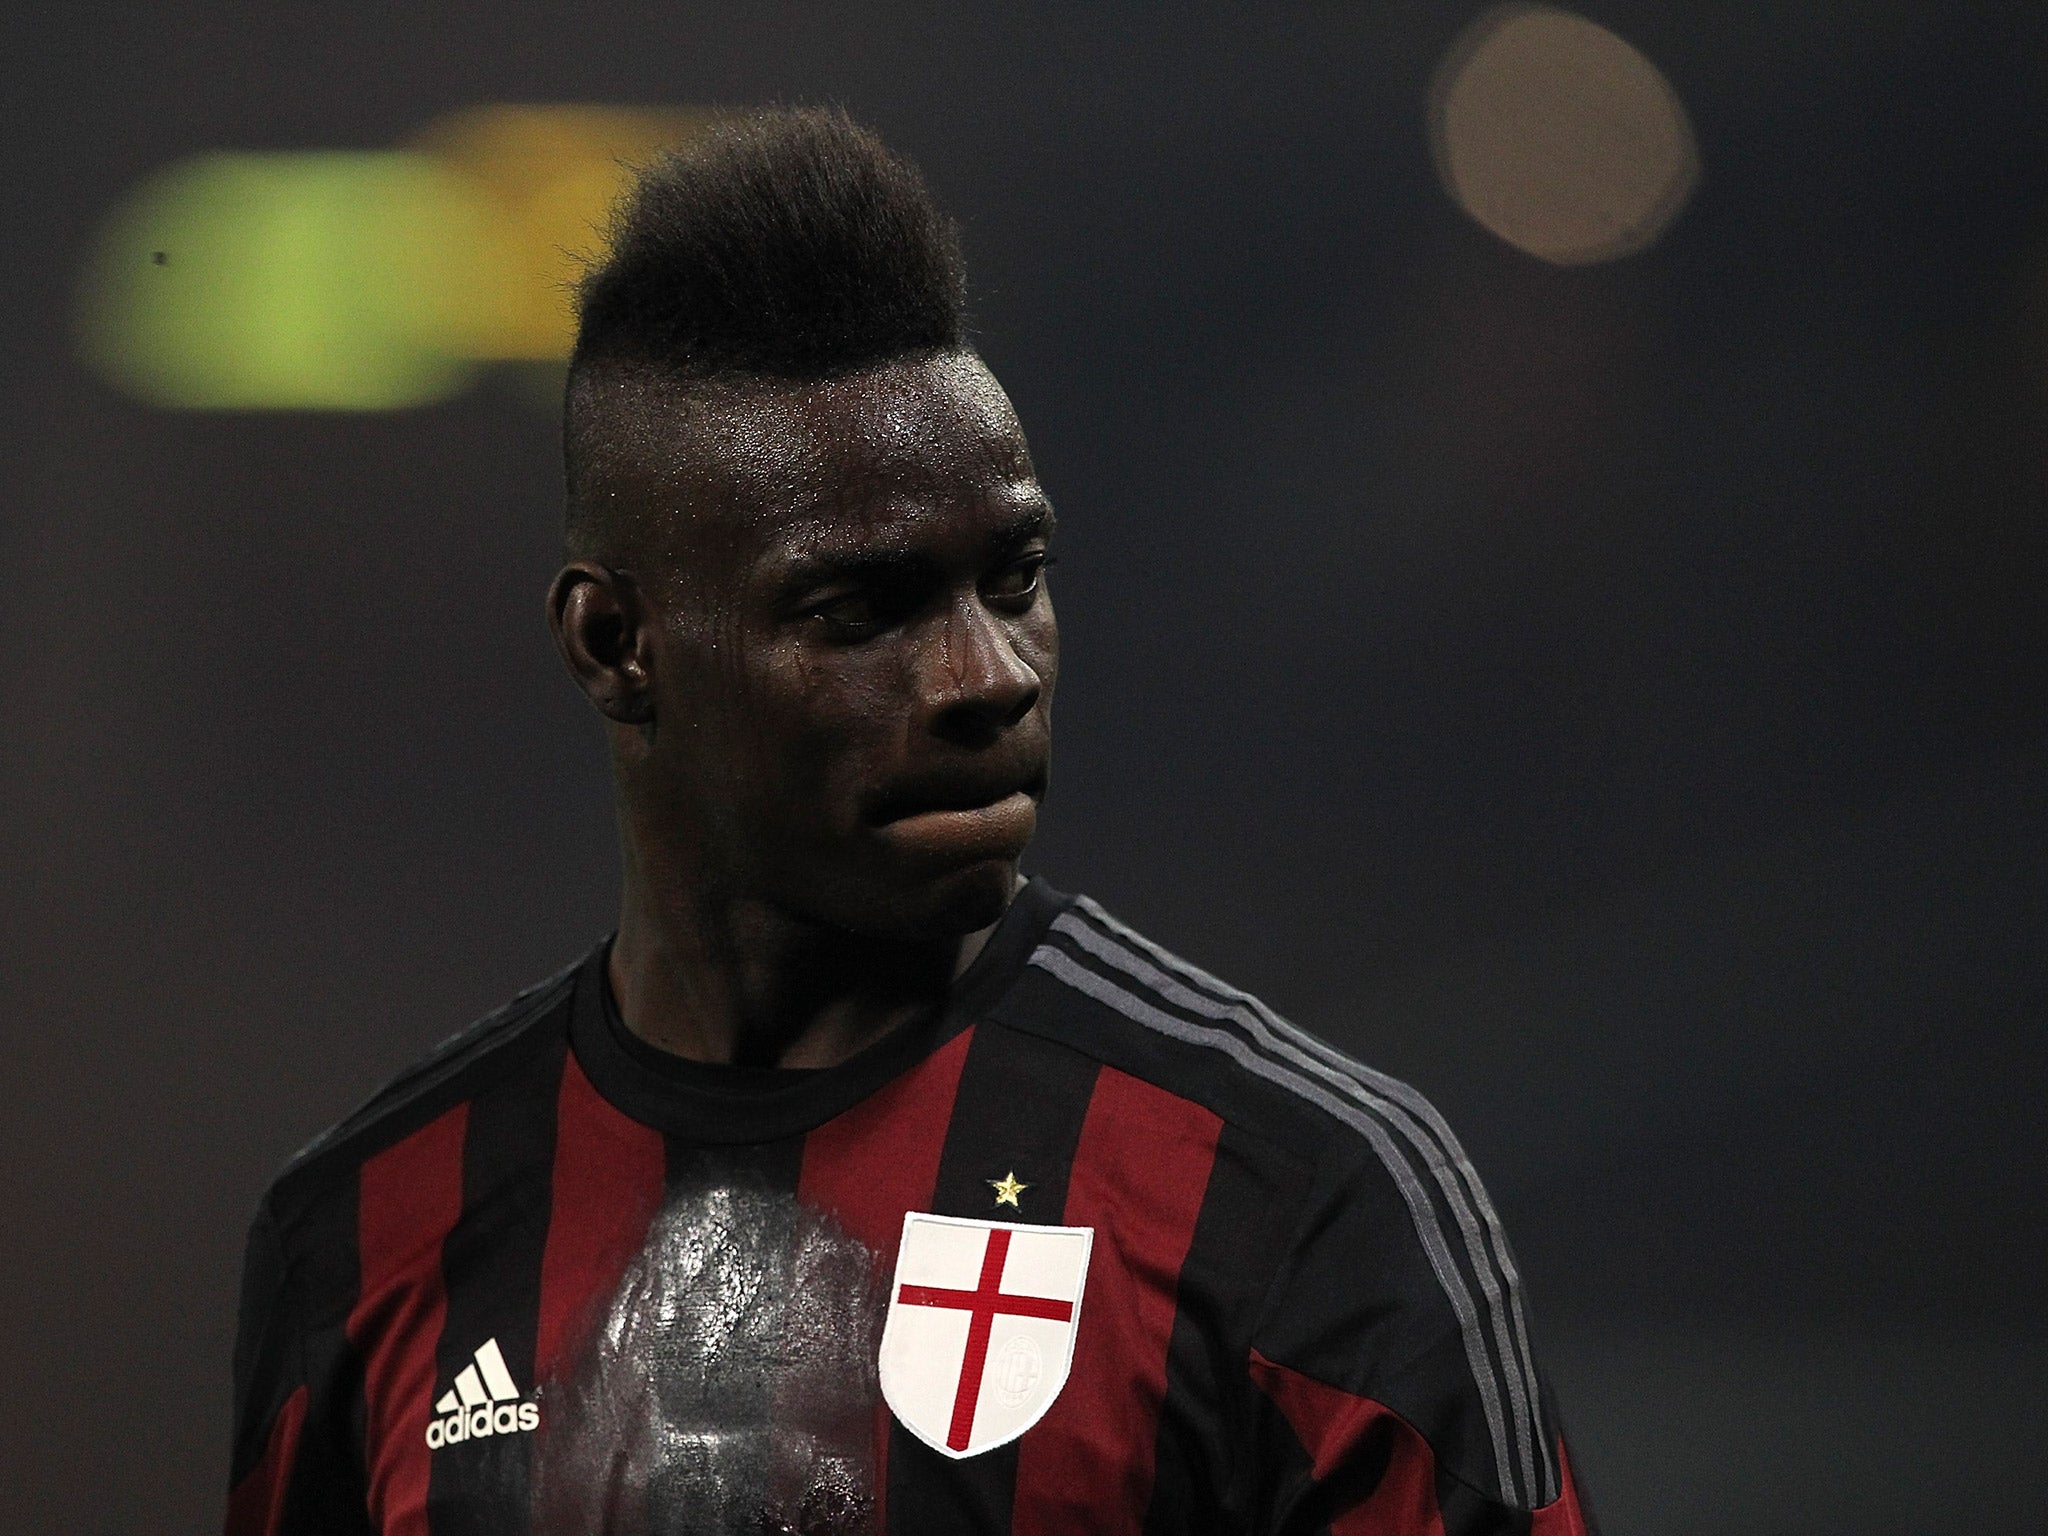 Mario Balotelli does not want to return to Liverpool because he was 'not happy' at the club